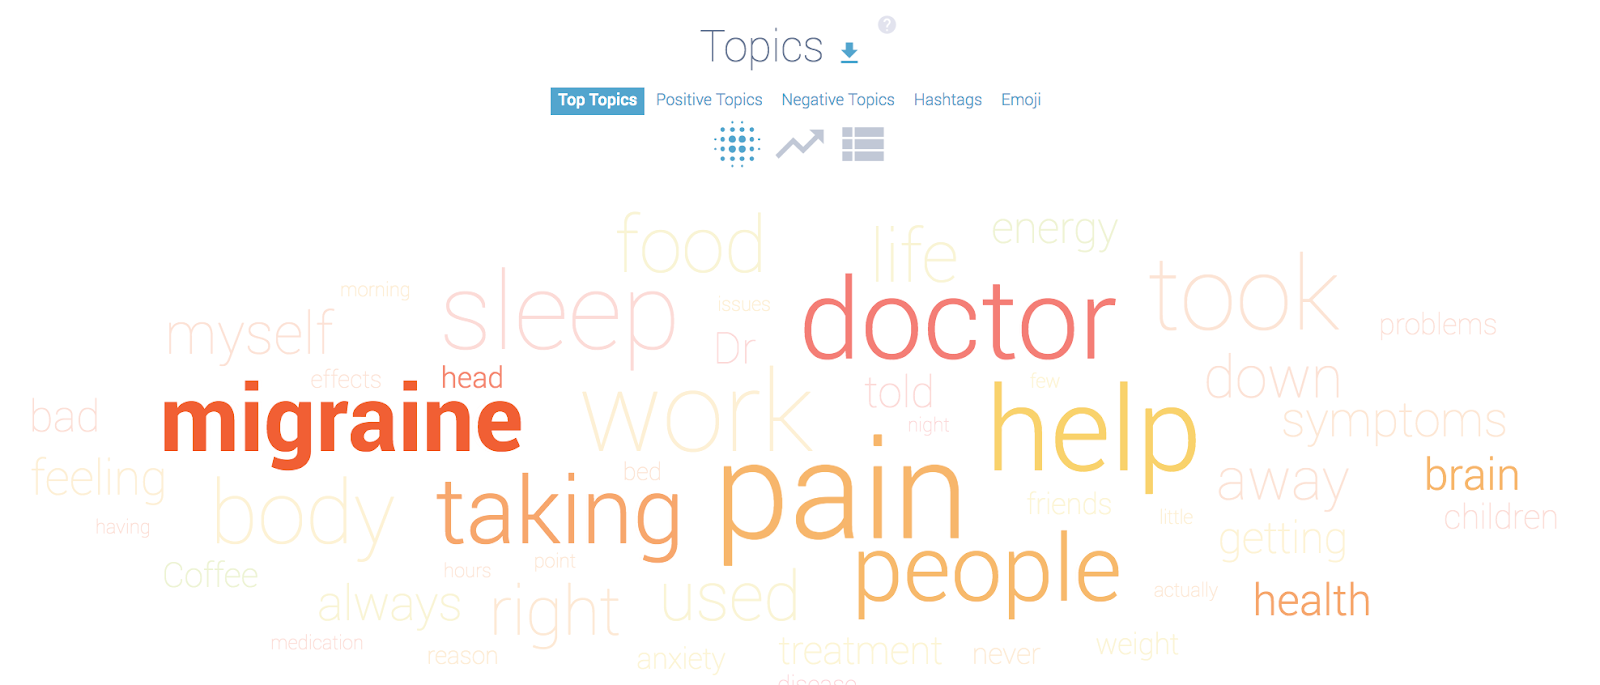 Social listening analysis of headaches and medicine word cloud